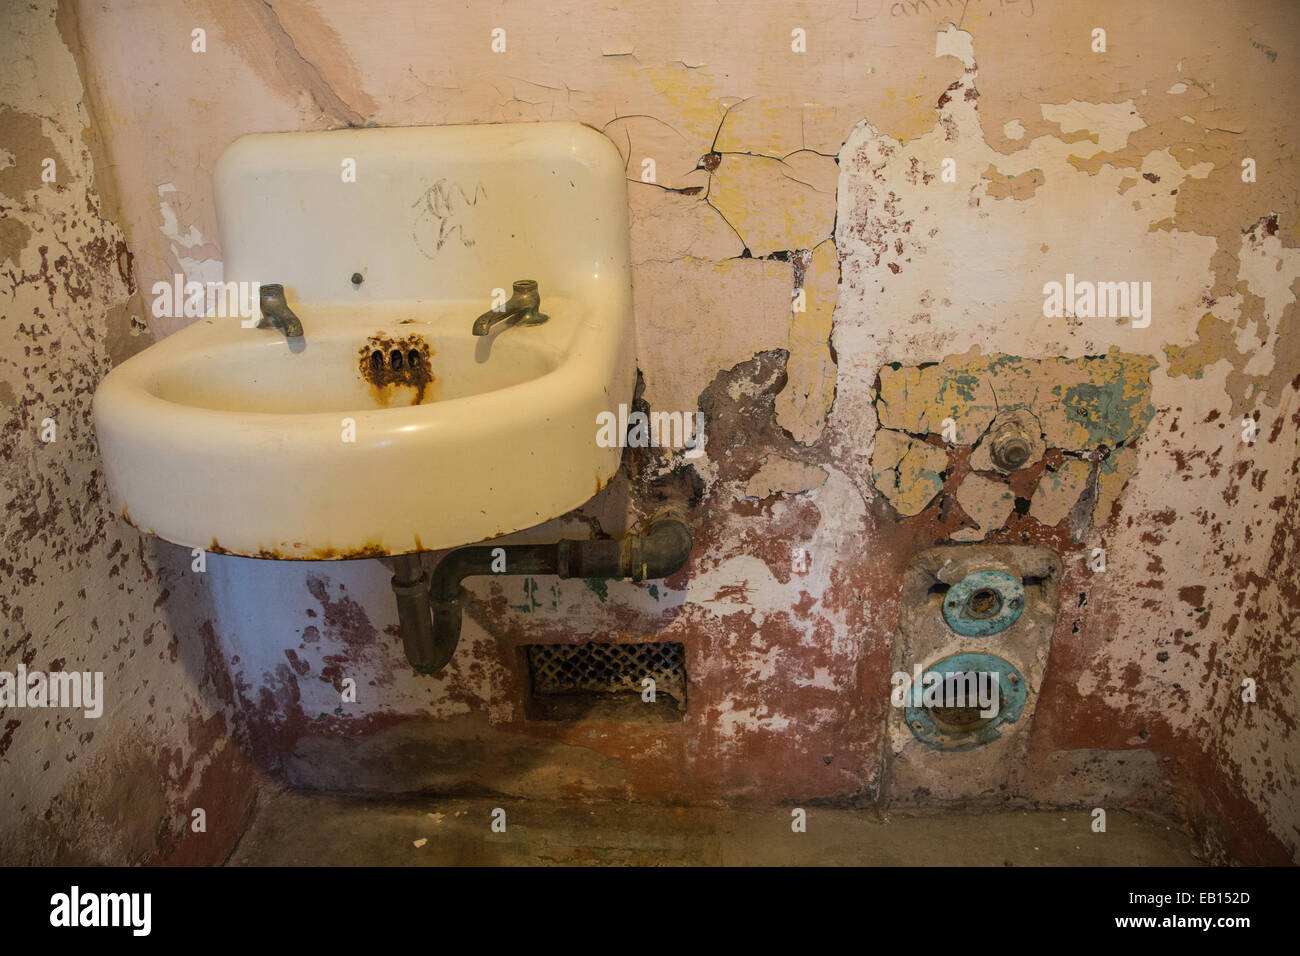 An old rusty sink, cracked walls and plumbing in an Alcratraz prison cell as part of the @Large: Ai Weiwei exhibit. Stock Photo